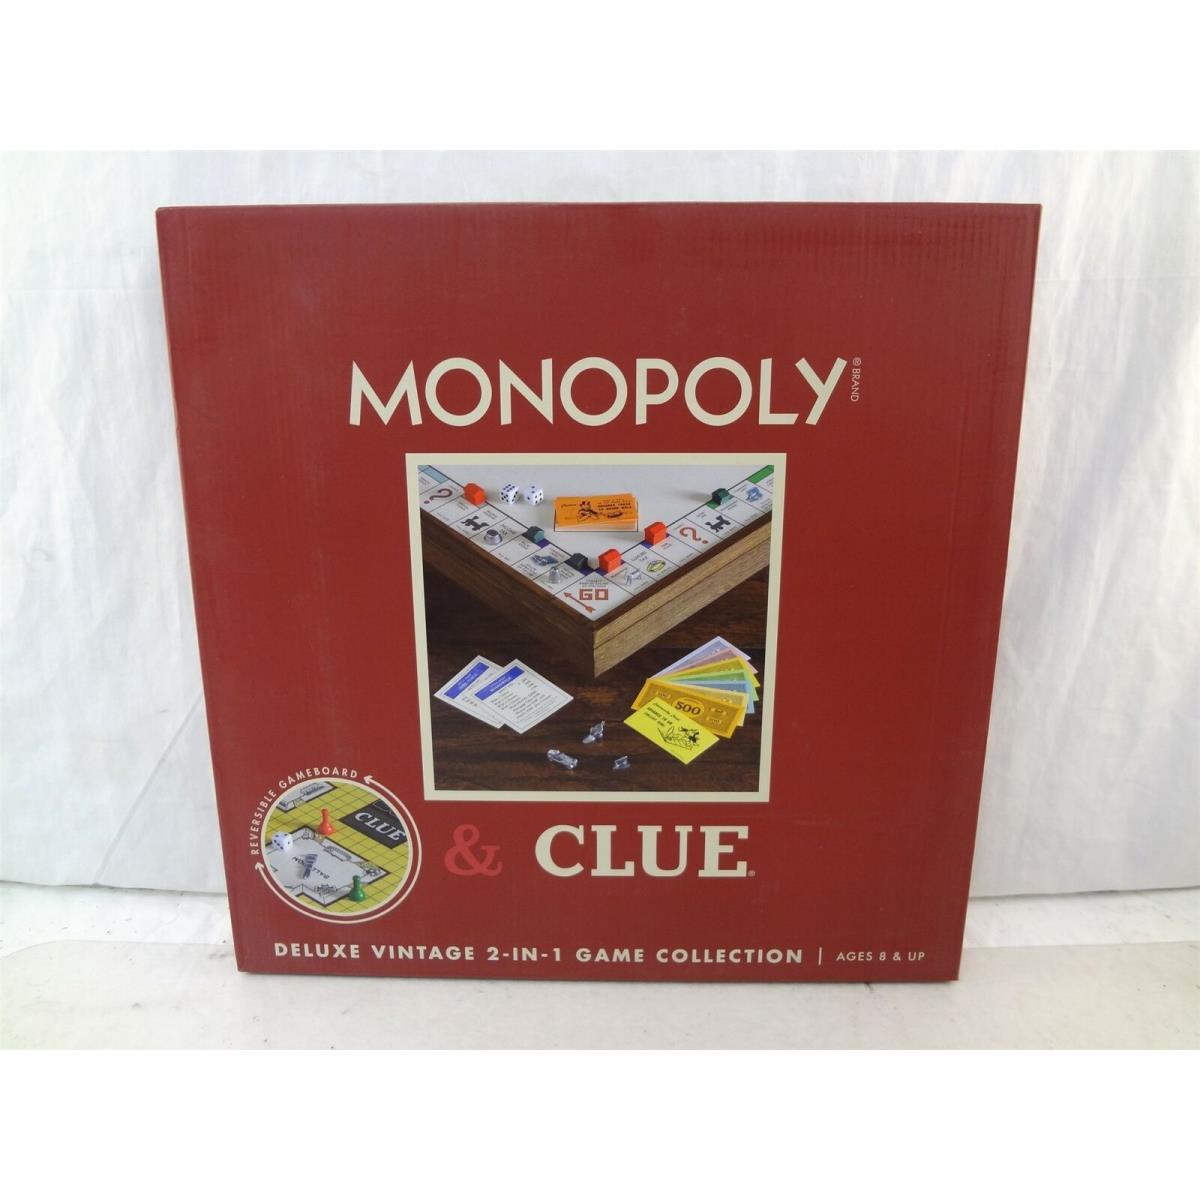 Monopoly Clue Deluxe Vintage 2-in-1 Game Collection 1458335